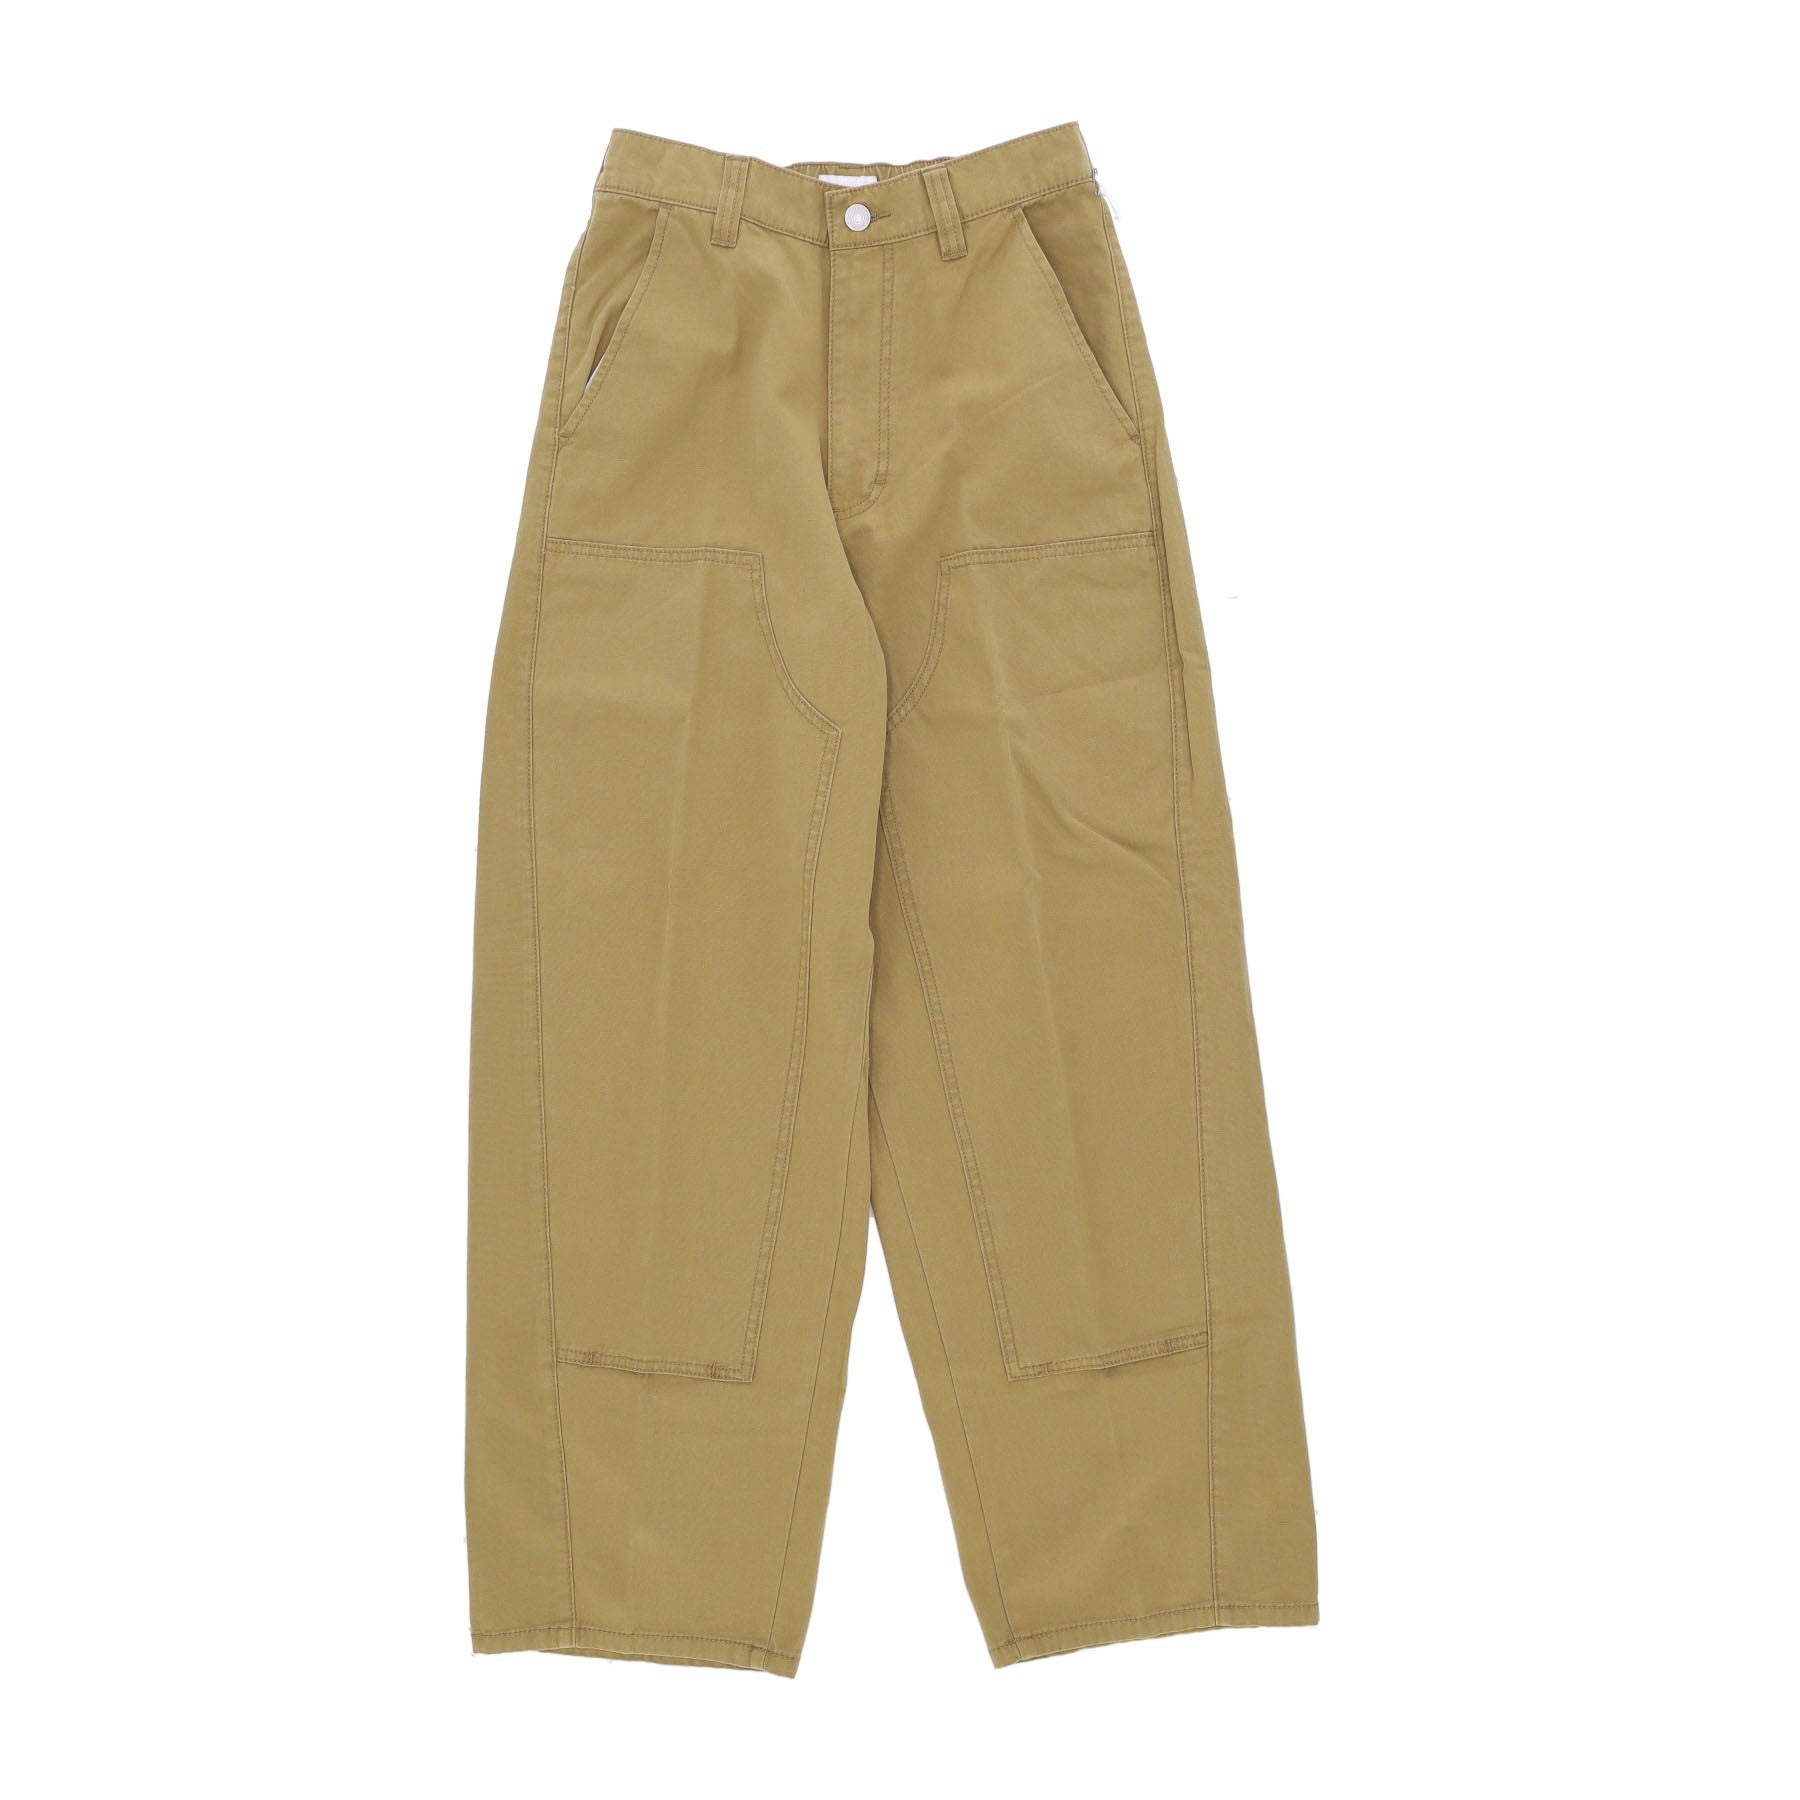 Tami Baggy Pant Women's Long Trousers Olive Oil